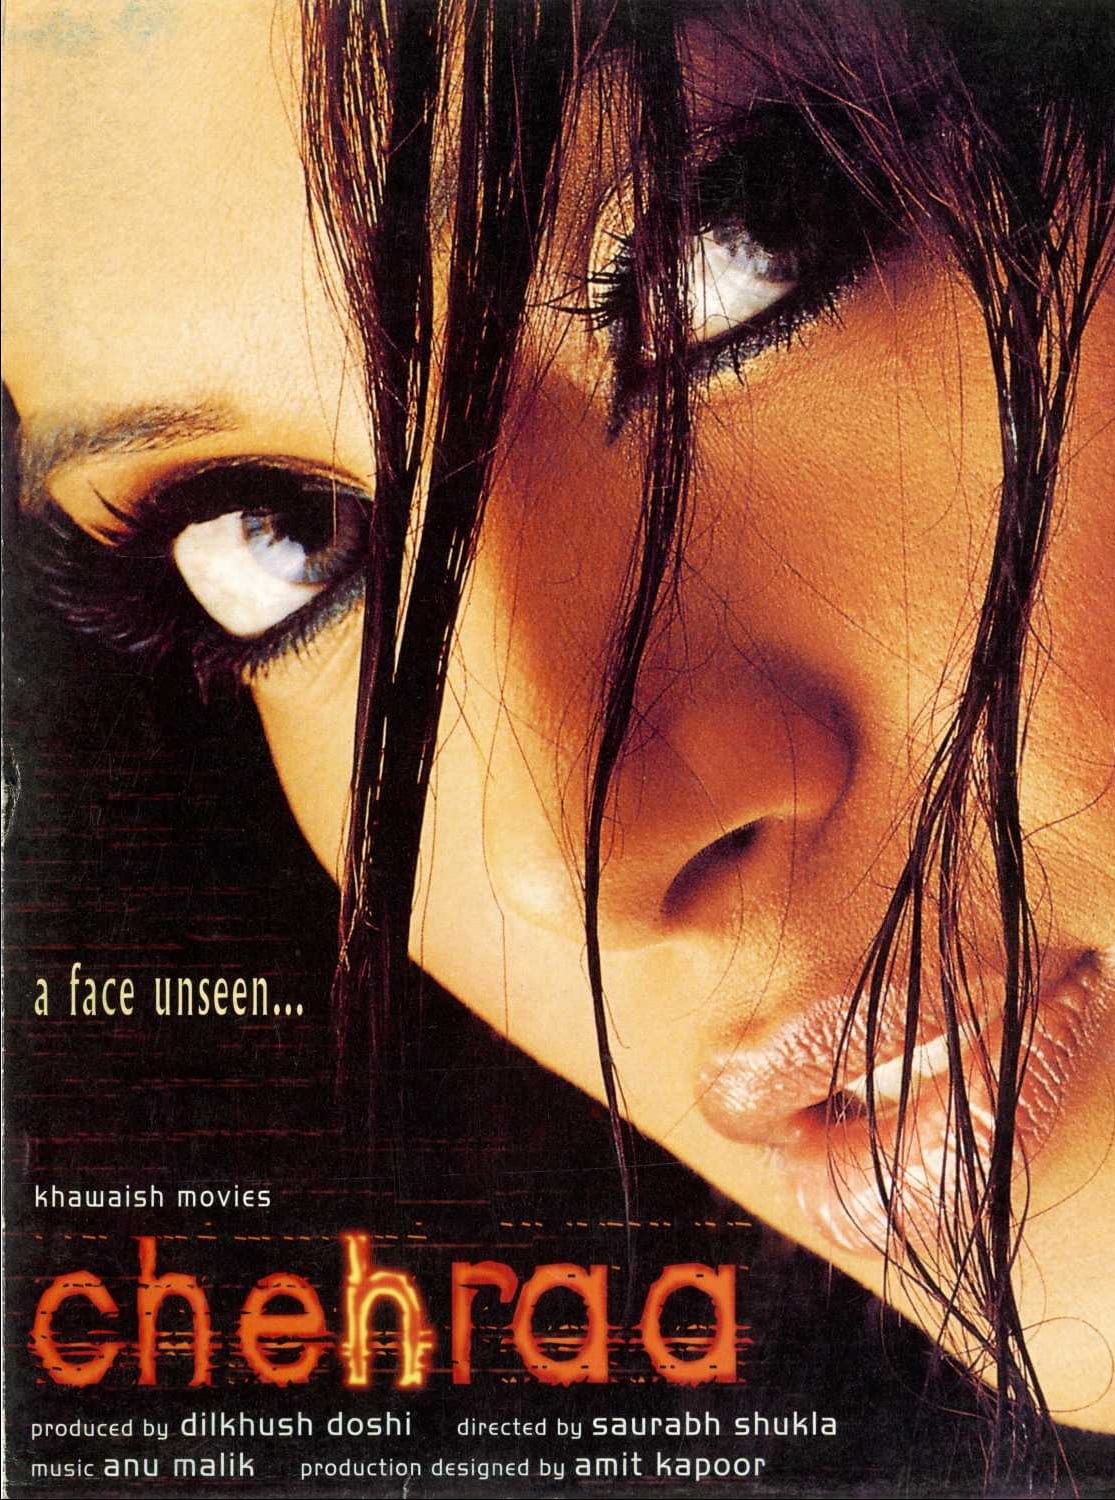 Poster for the movie "Chehraa"